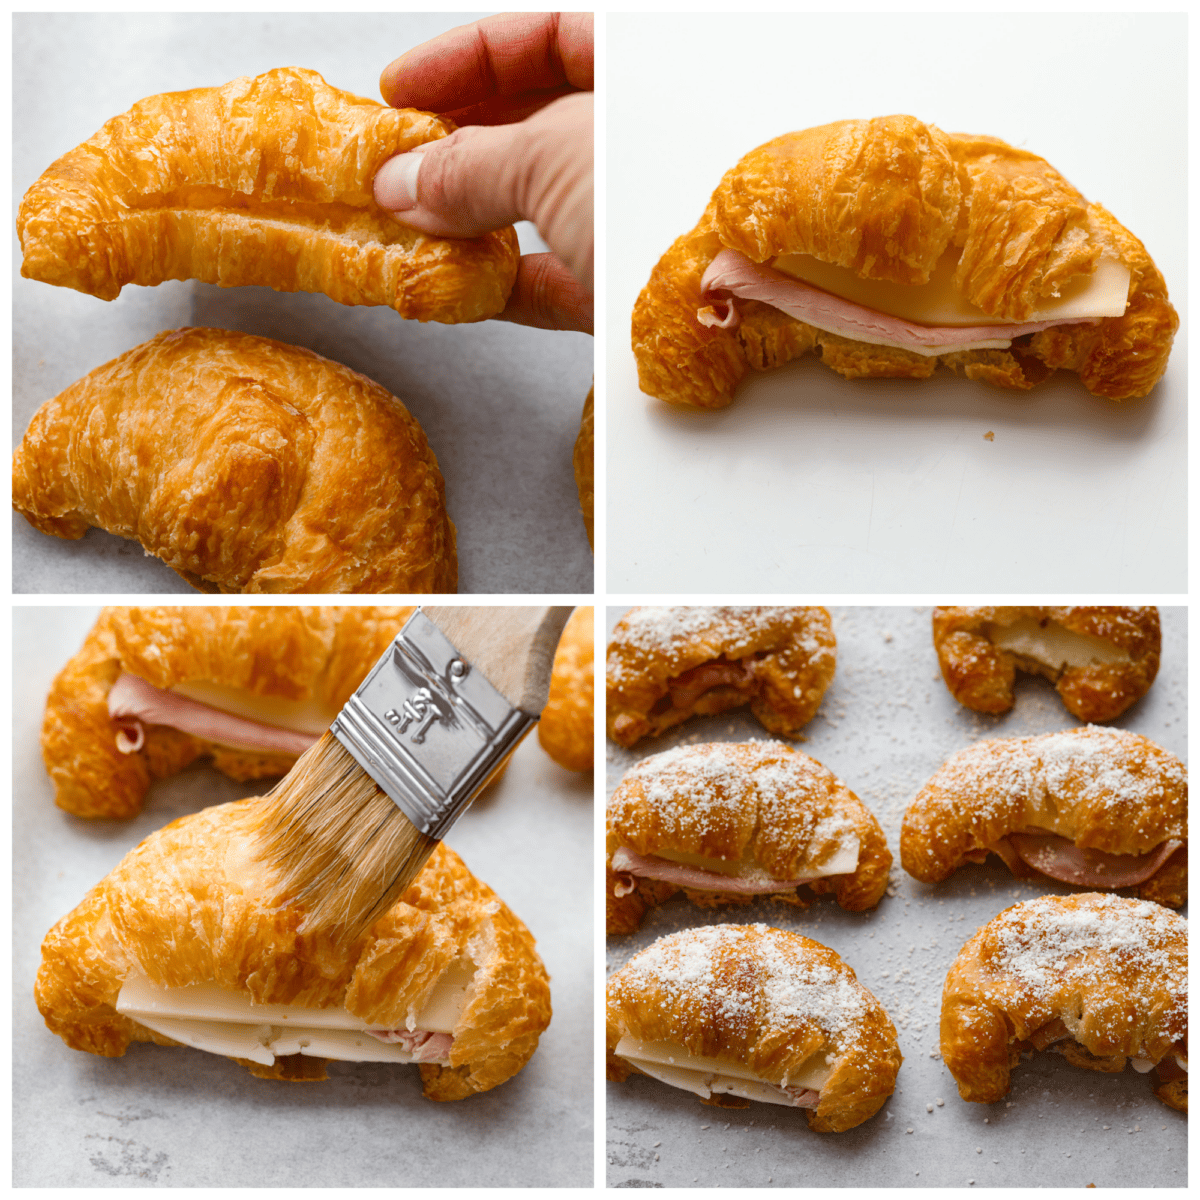 First photo of cutting the croissants. Second photo of the ham and cheese in the croissant. Third photo of brushing the tops of the croissants with melted butter. Fourth photo of parmesan cheese sprinkled on top of the croissants.